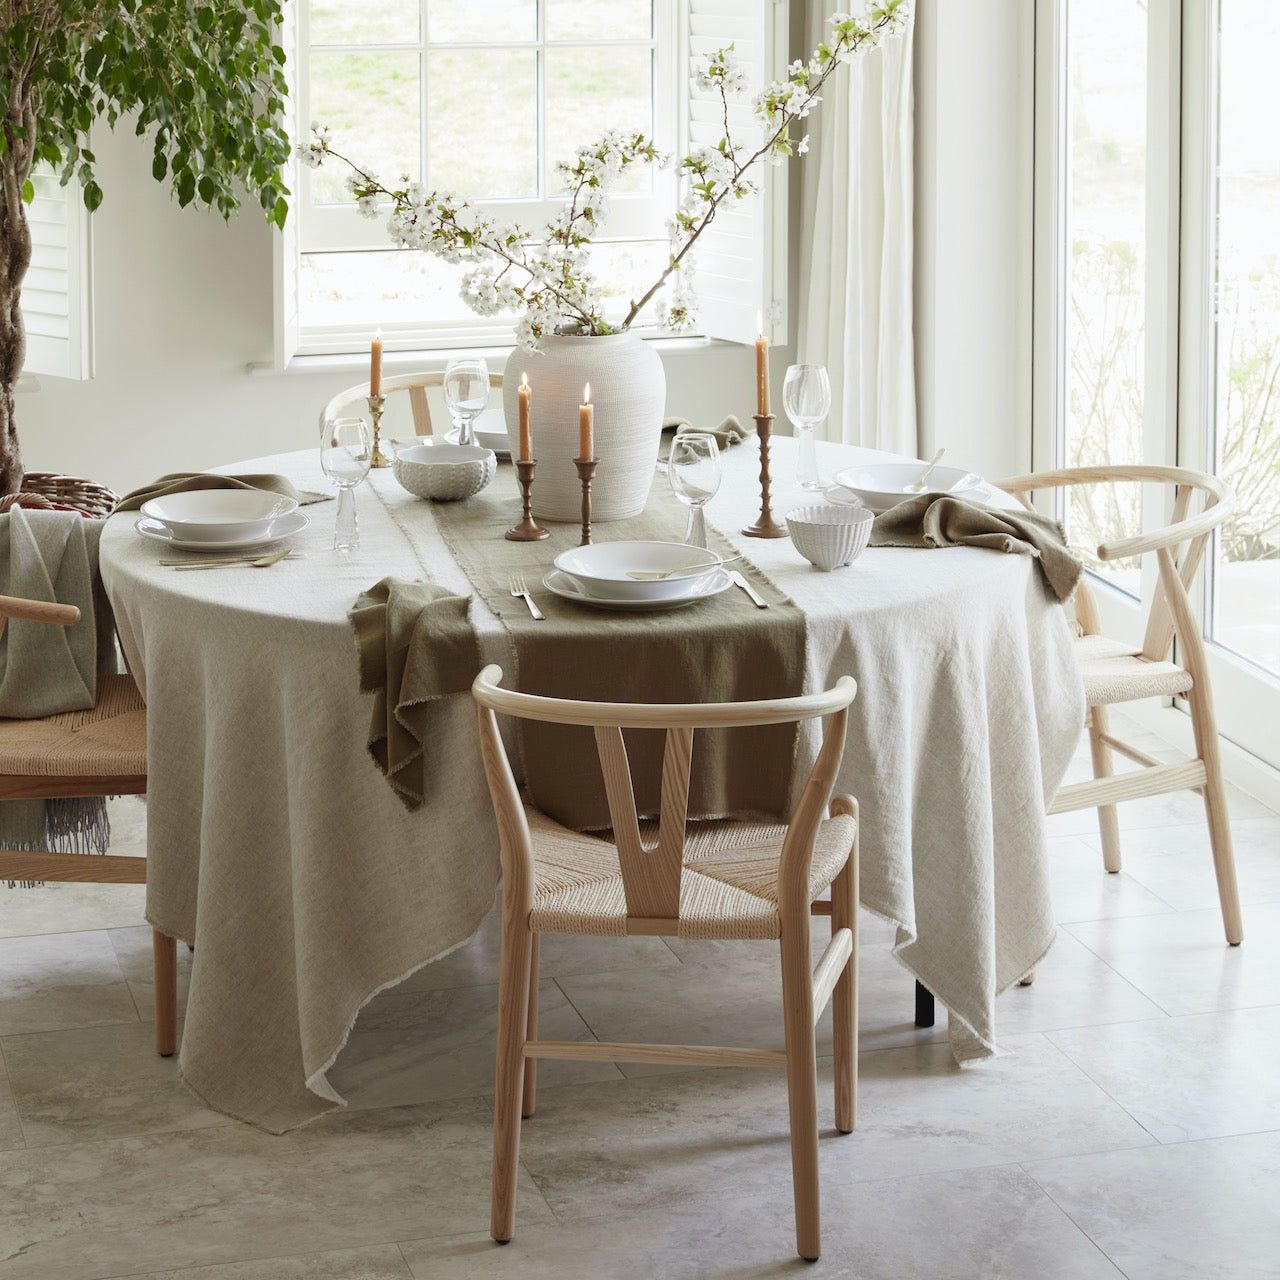 The Rustic Charm of Wooden Tables: How to Style Them for an Elegant Home